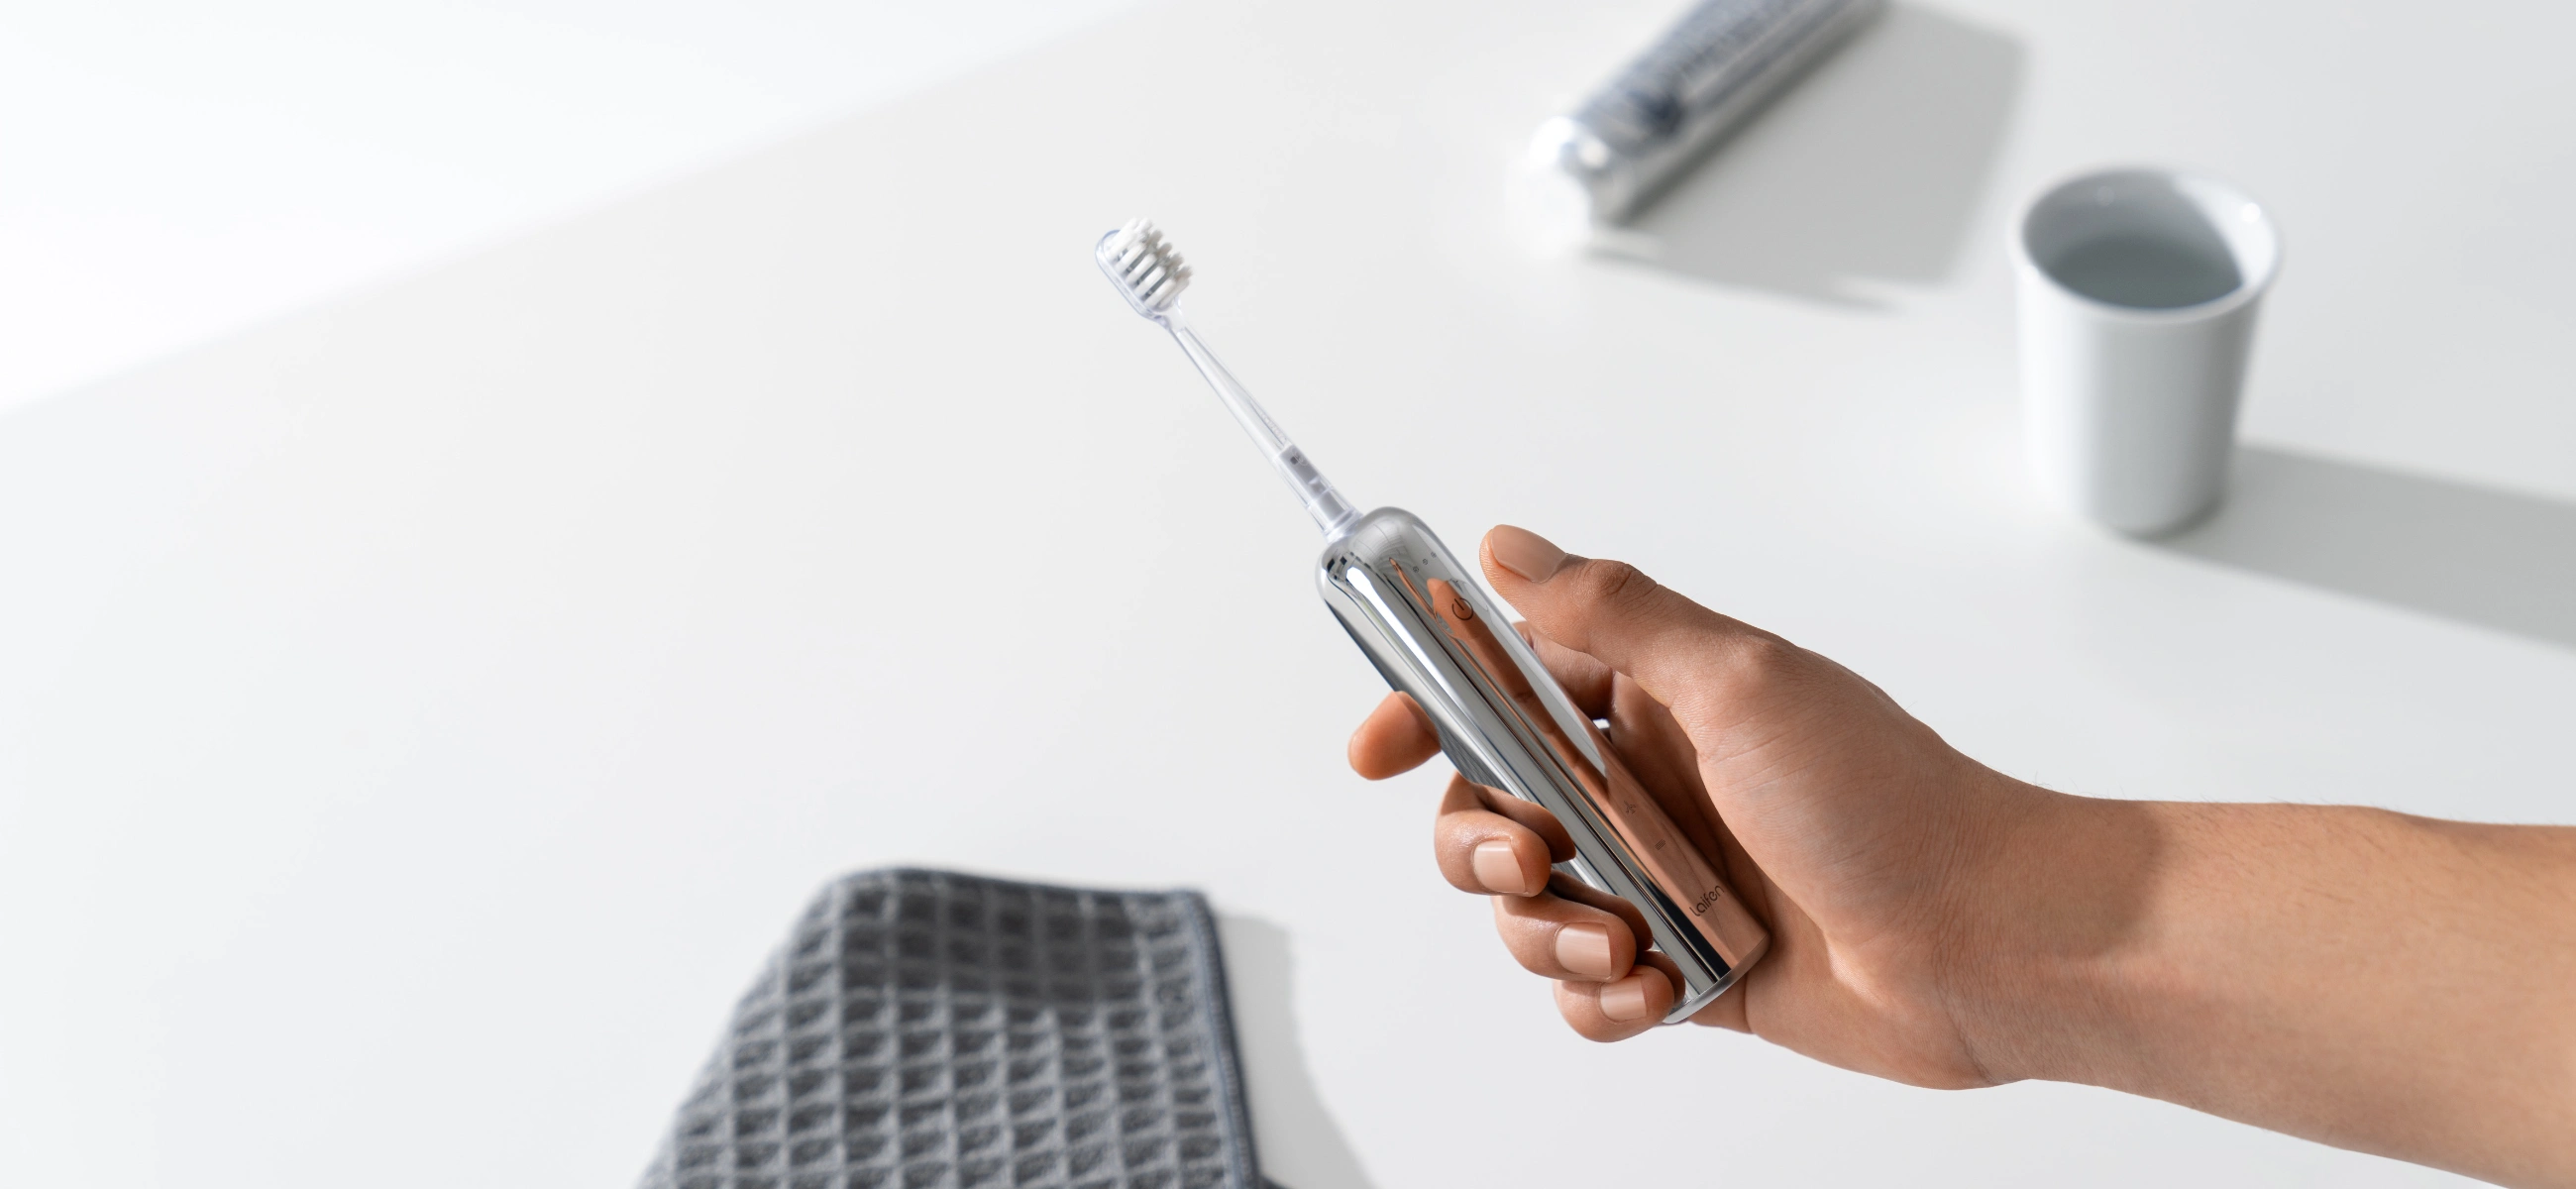 How often should you replace your toothbrush and its head